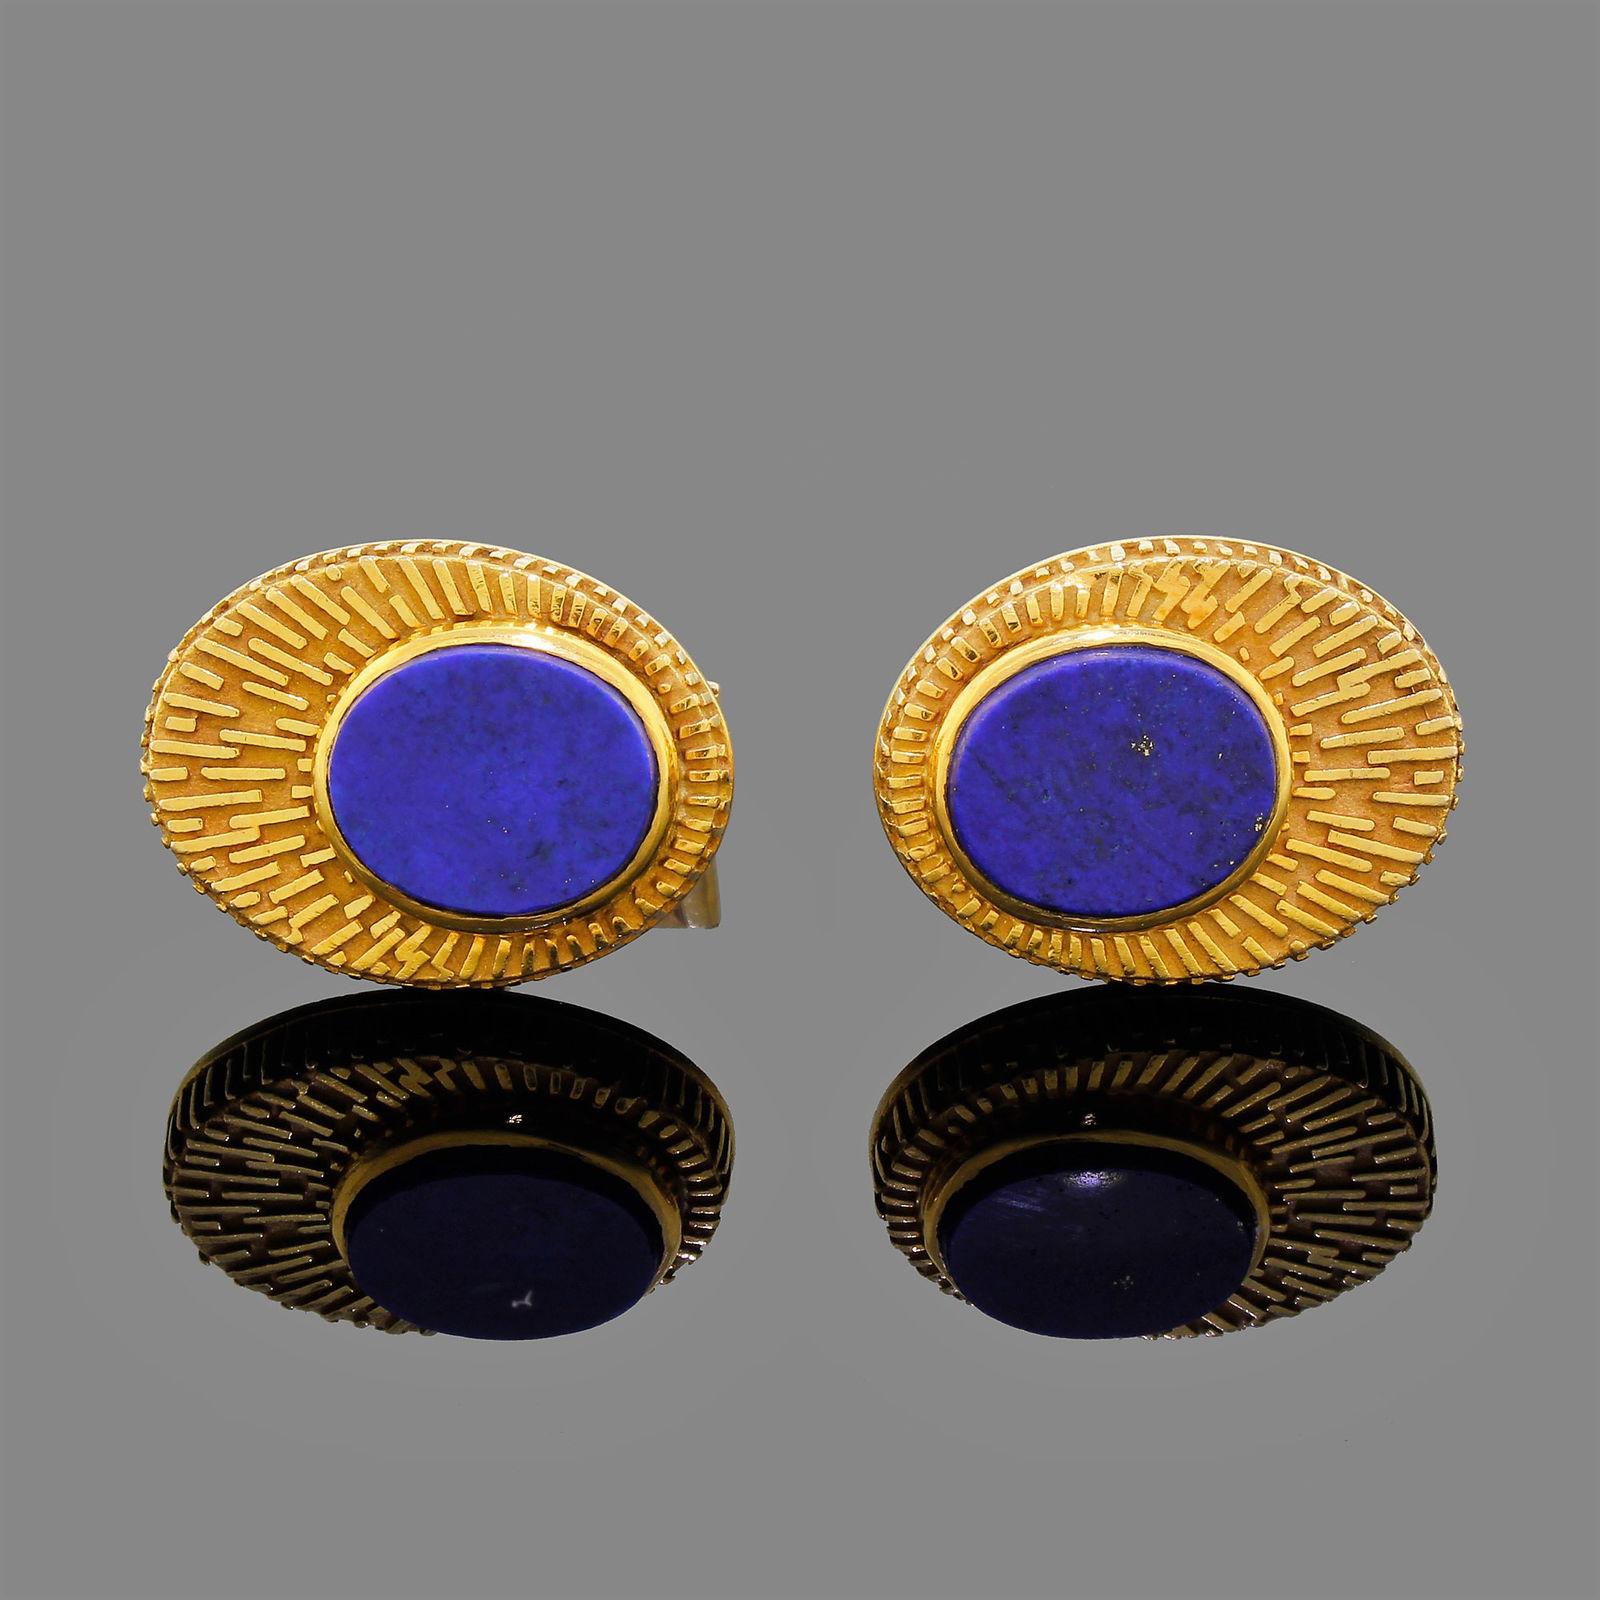 Details & Condition: Beautiful full size pair of 14k gold and Lapis cufflinks by the renowned La Triomphe / Astoria Jewelry Company of New York.
These cufflinks are from in excellent pre-owned condition, no repairs, cracks to Lapis or replaced